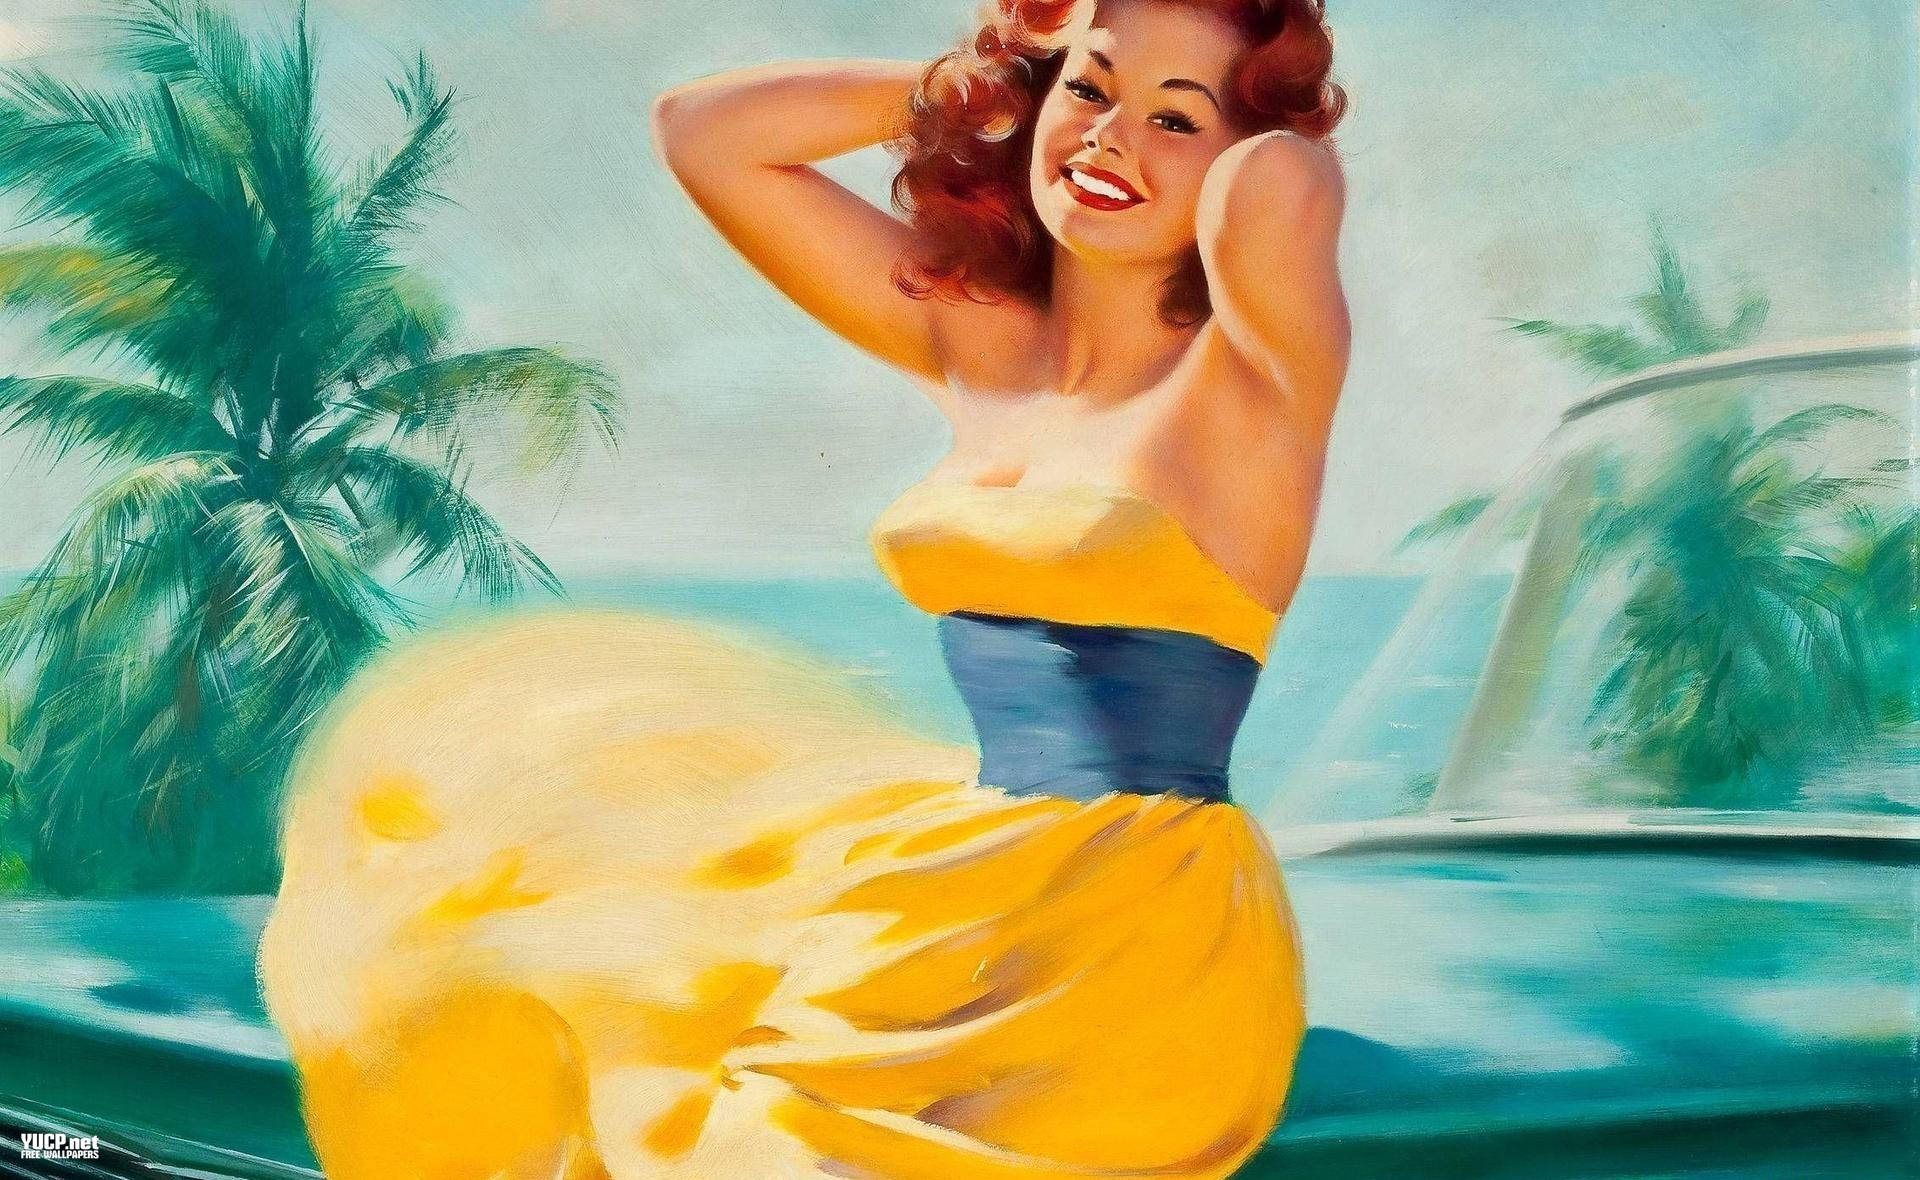 Vintage Pin Up Wallpapers - Wallpaper Cave